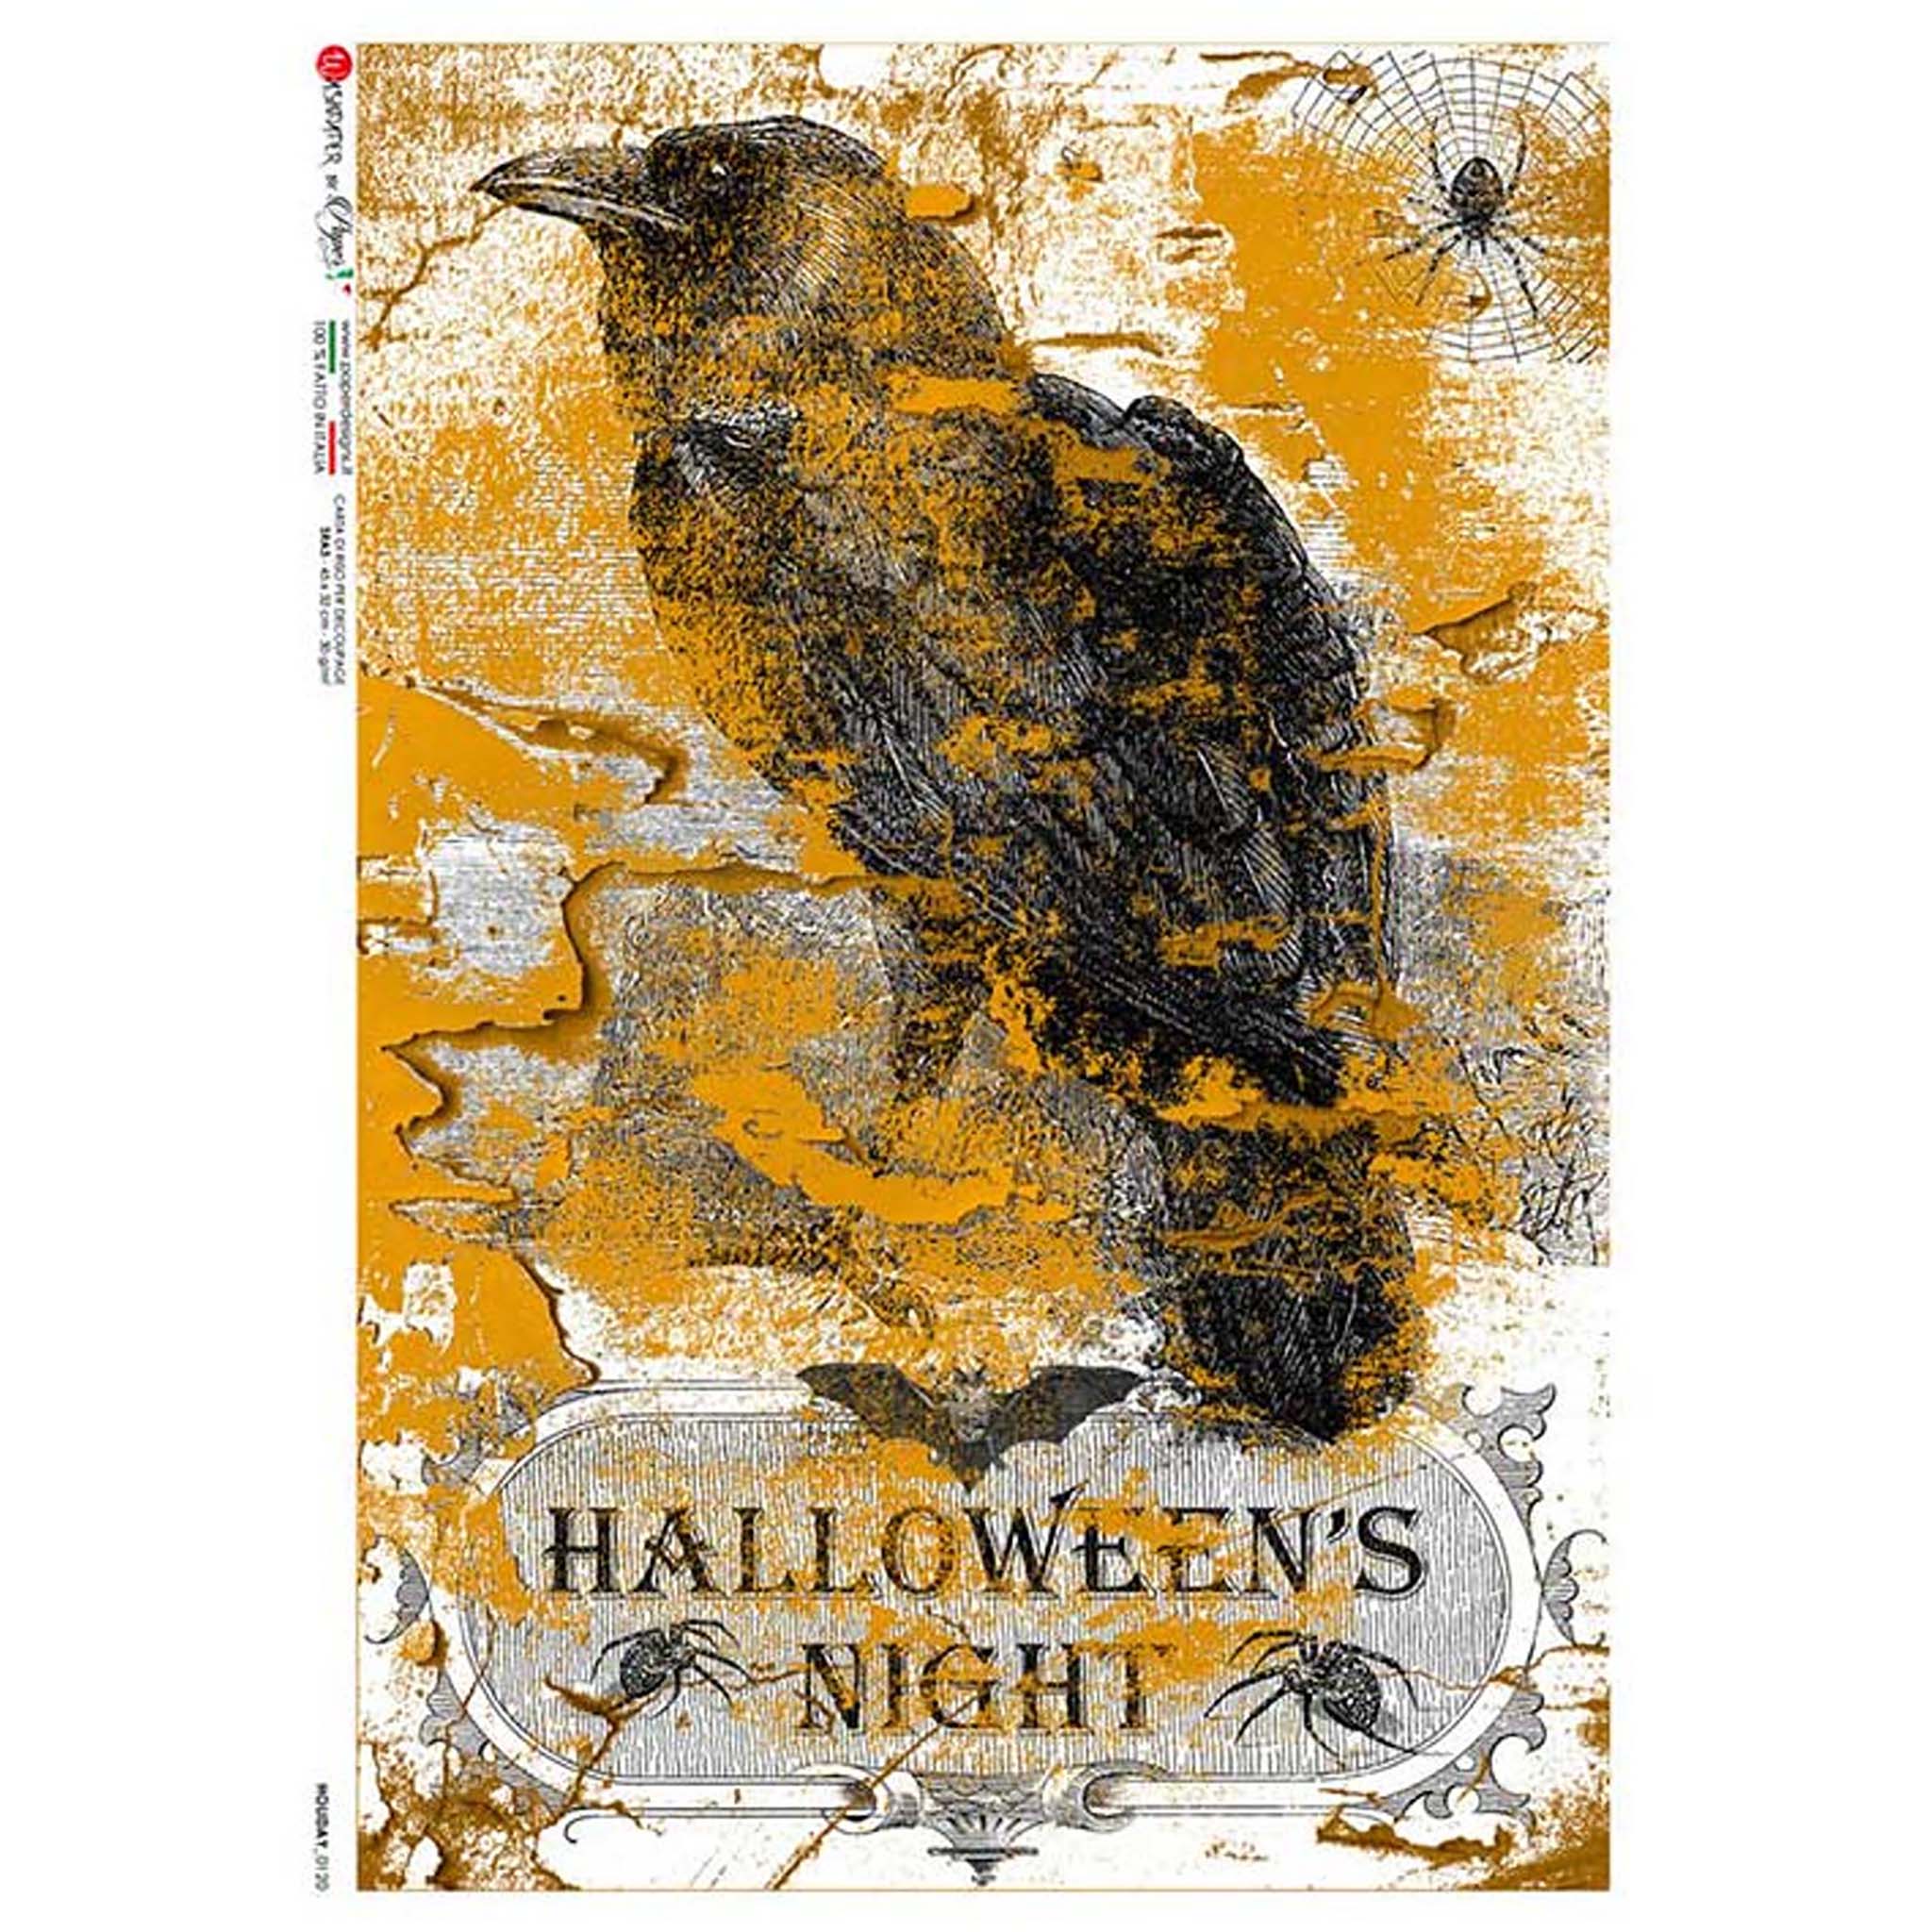 A4 rice paper that features a drawn raven and spider on a web with an orange sponge overlay. At the bottom is a sign that reads Halloween's Night. White borders are on the sides.